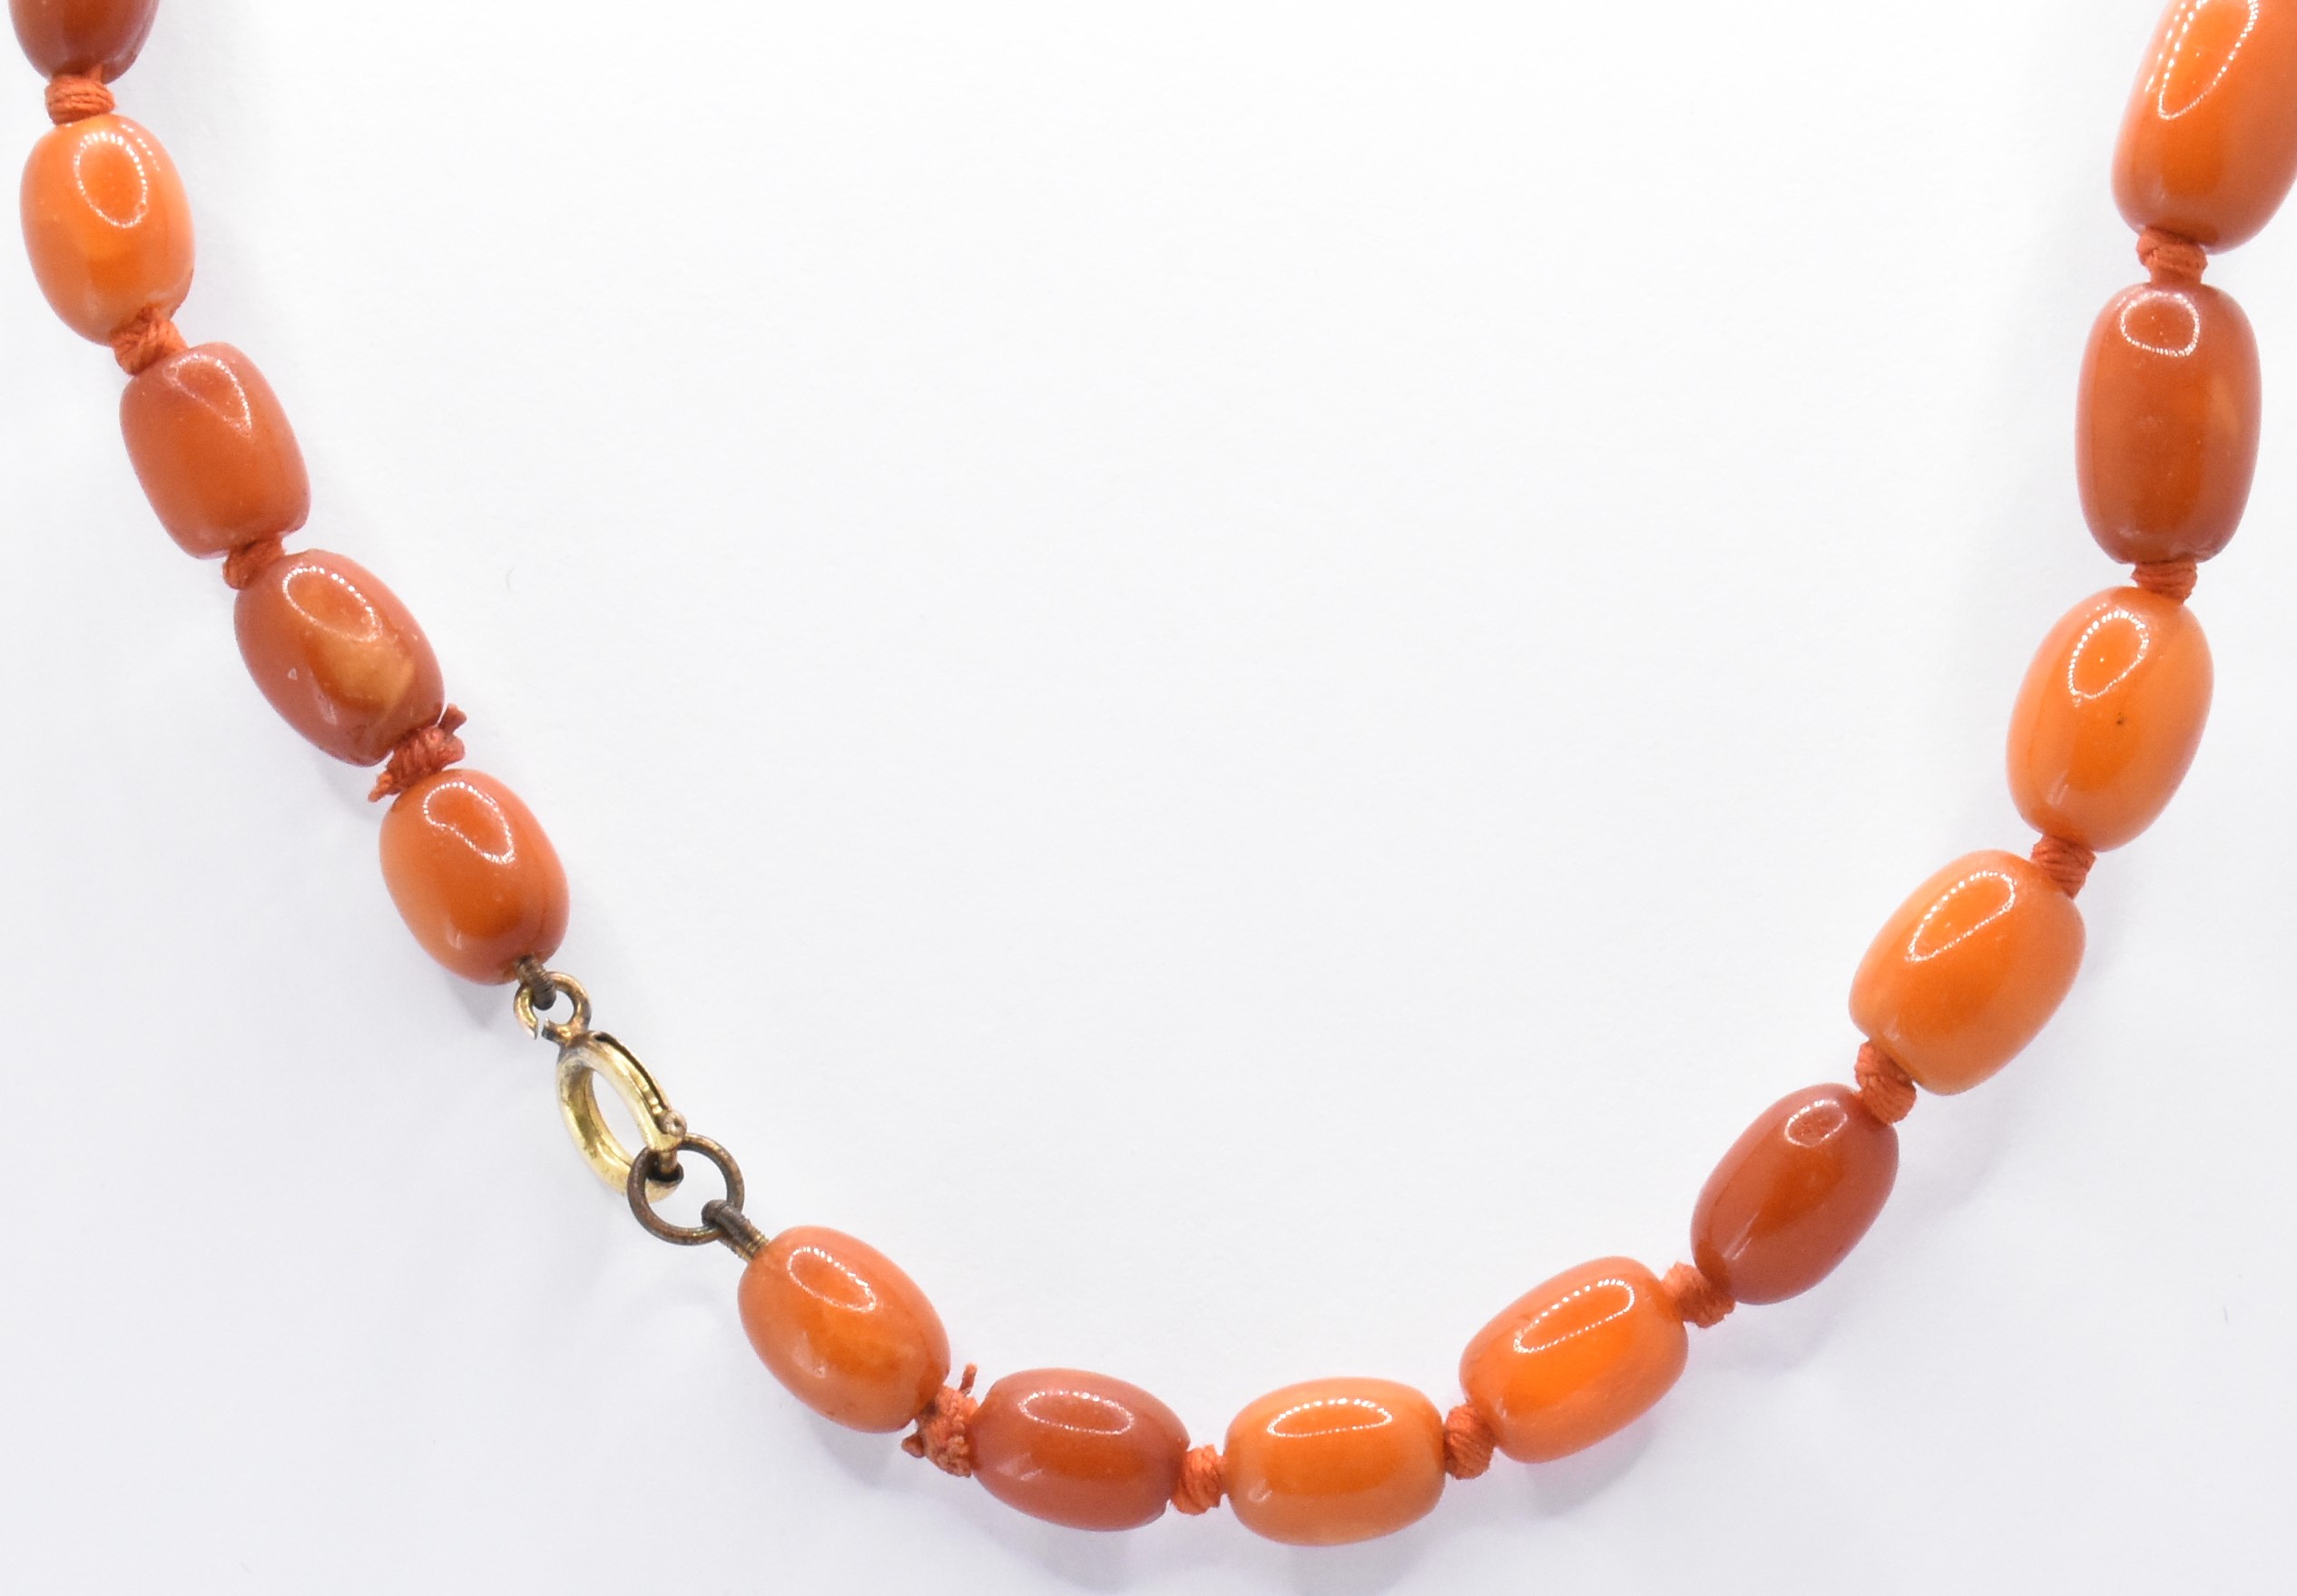 AMBER BEAD NECKLACE - Image 3 of 6